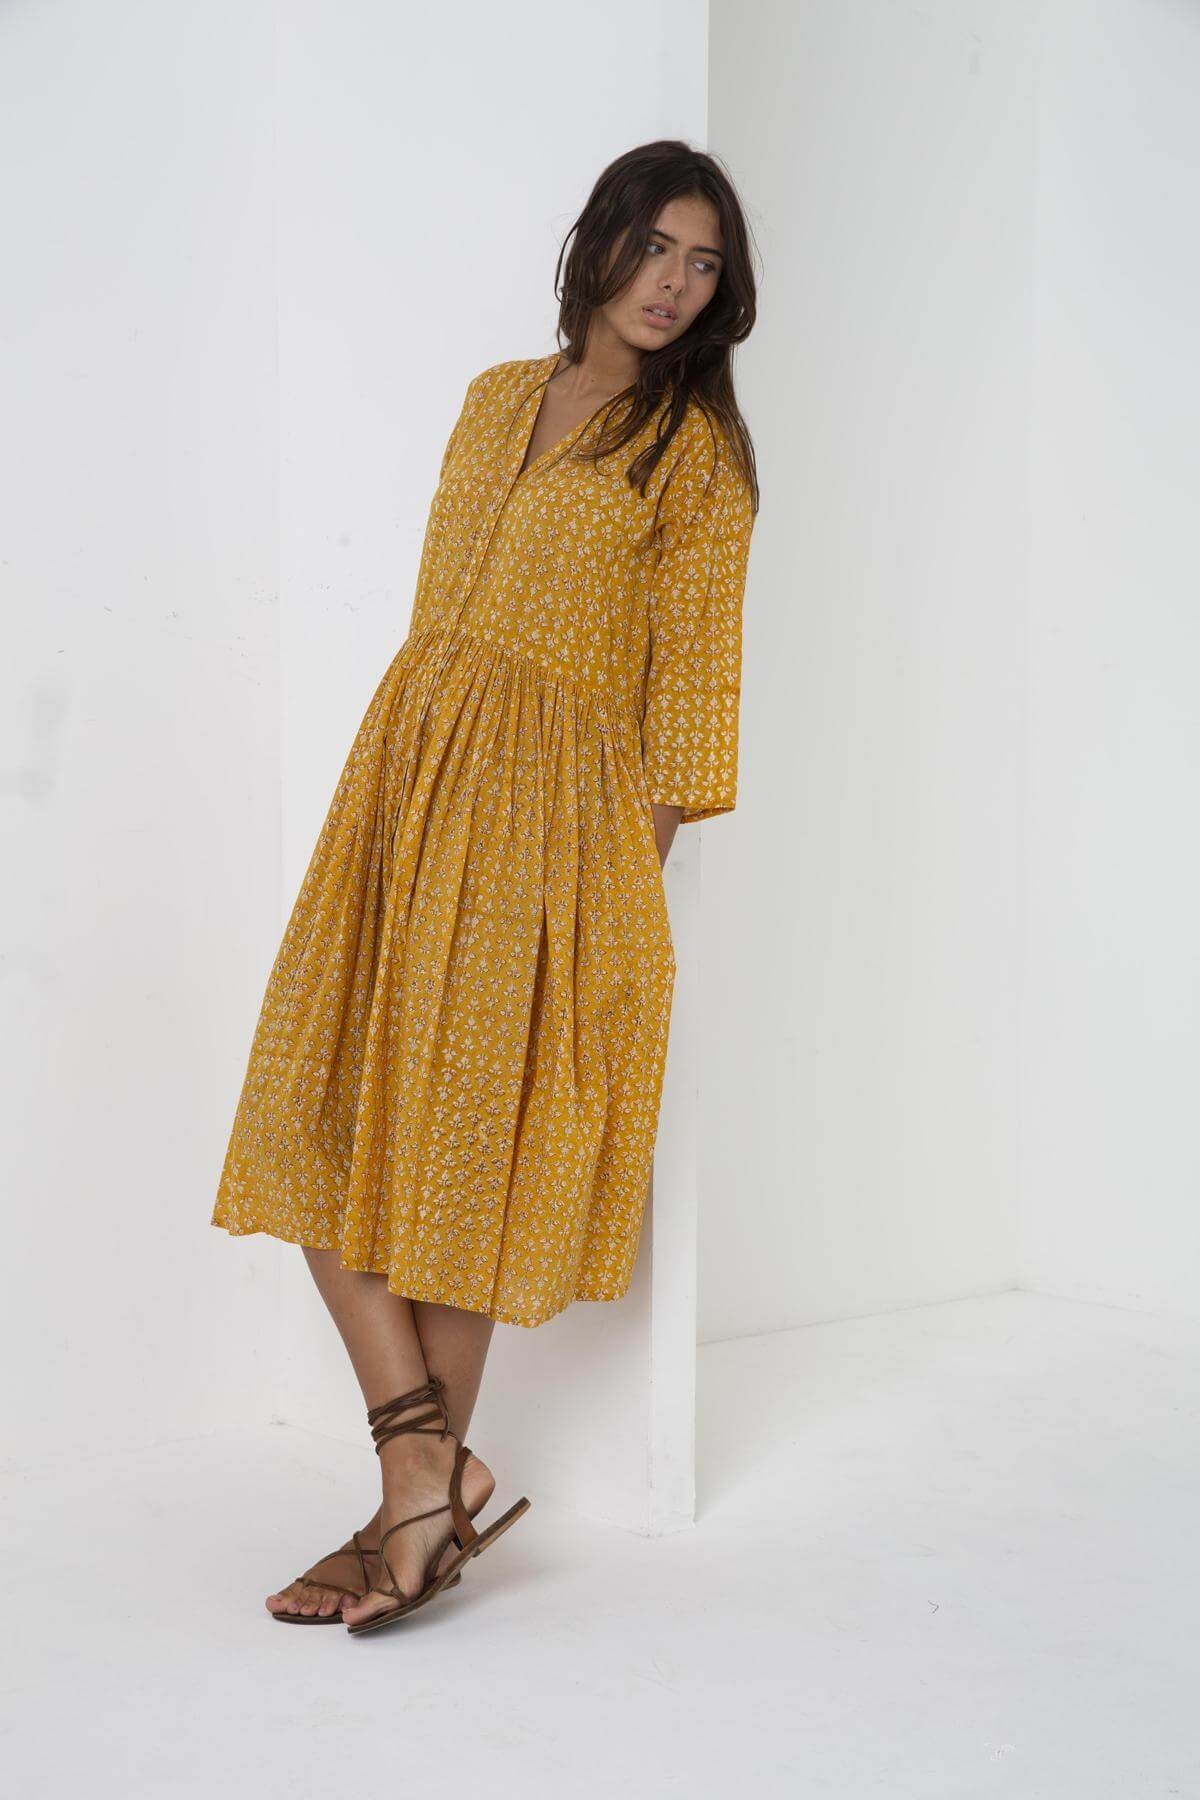 midi length dresses with sleeves